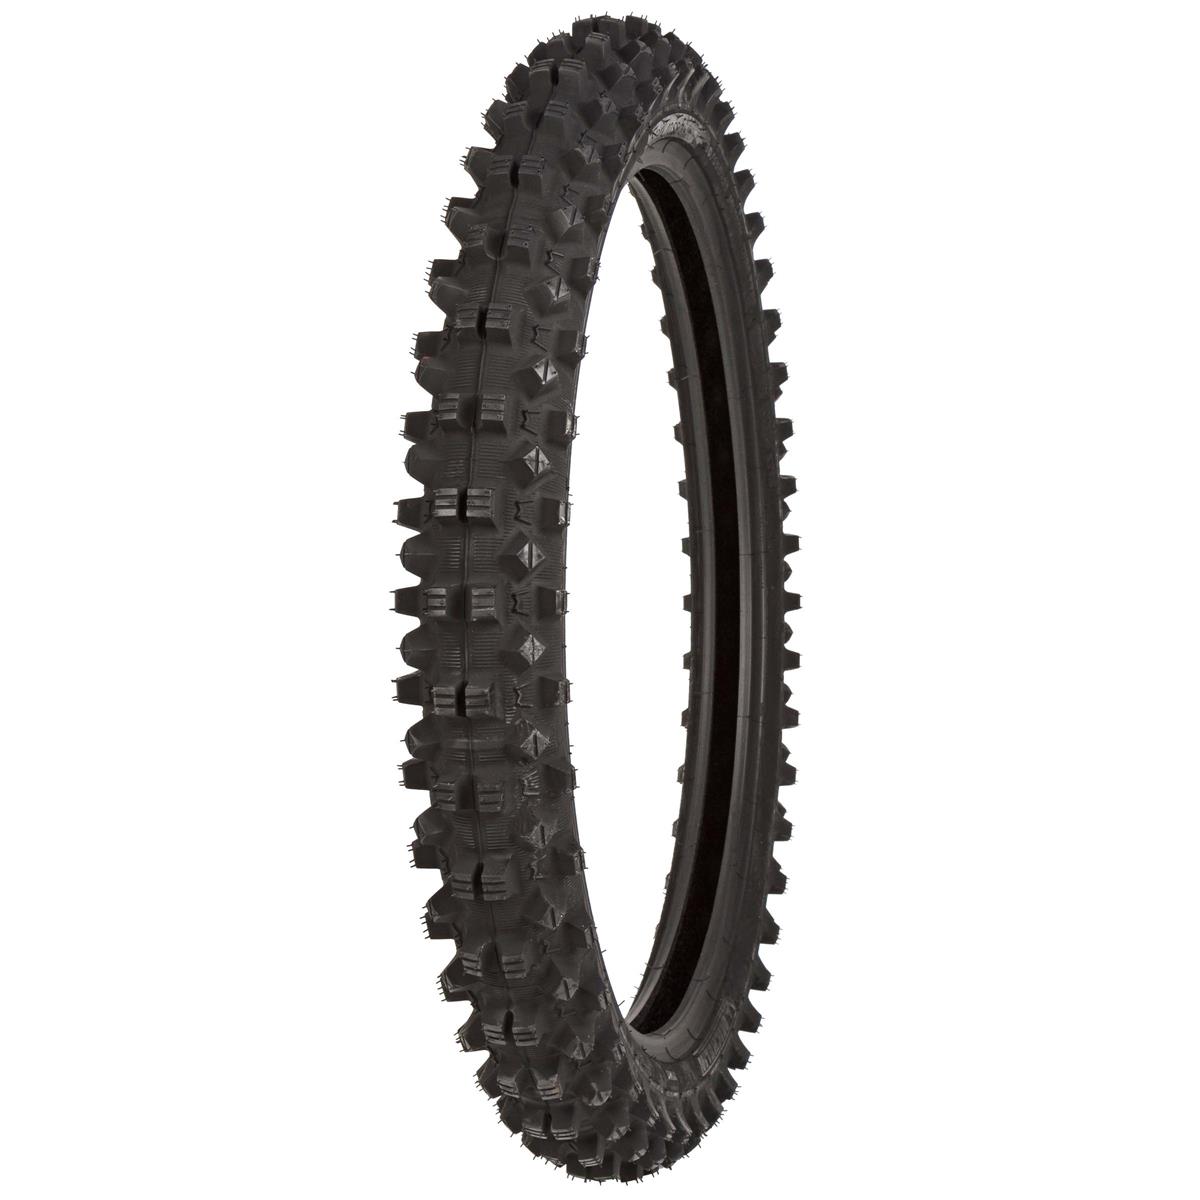 Michelin Front Tire Starcross 5 Soft 80/100-21